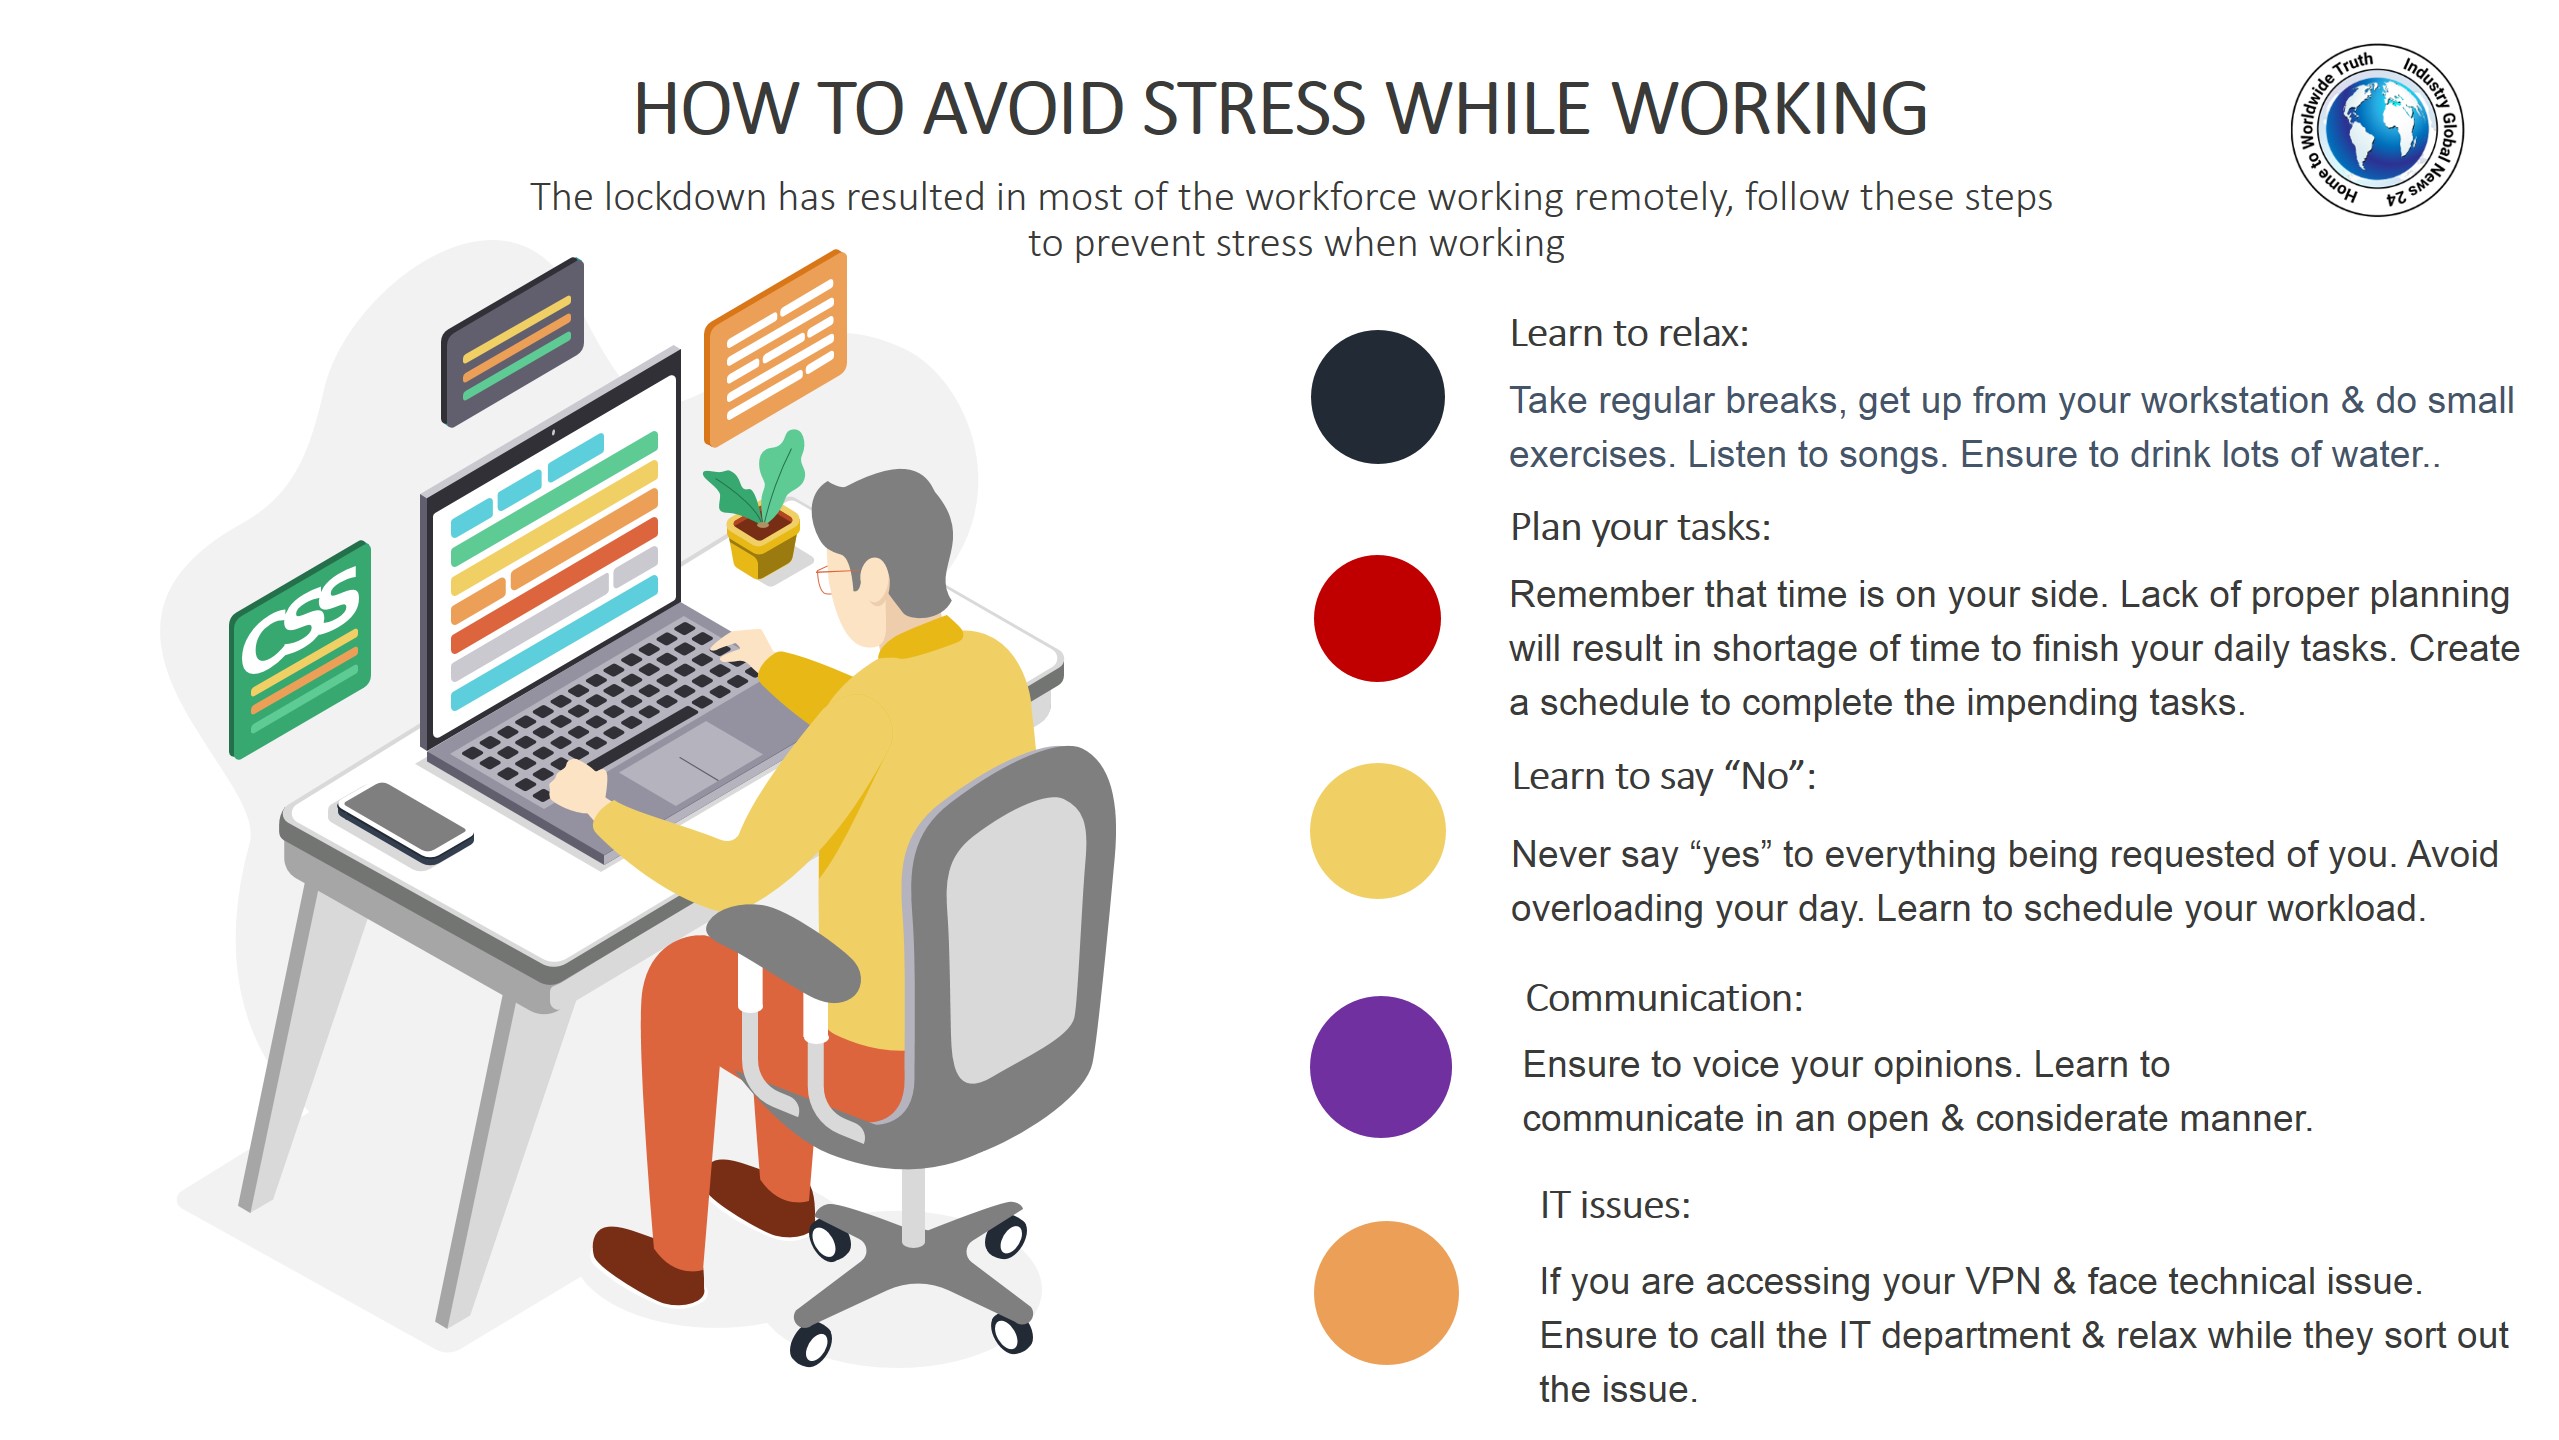 How to avoid stress while working